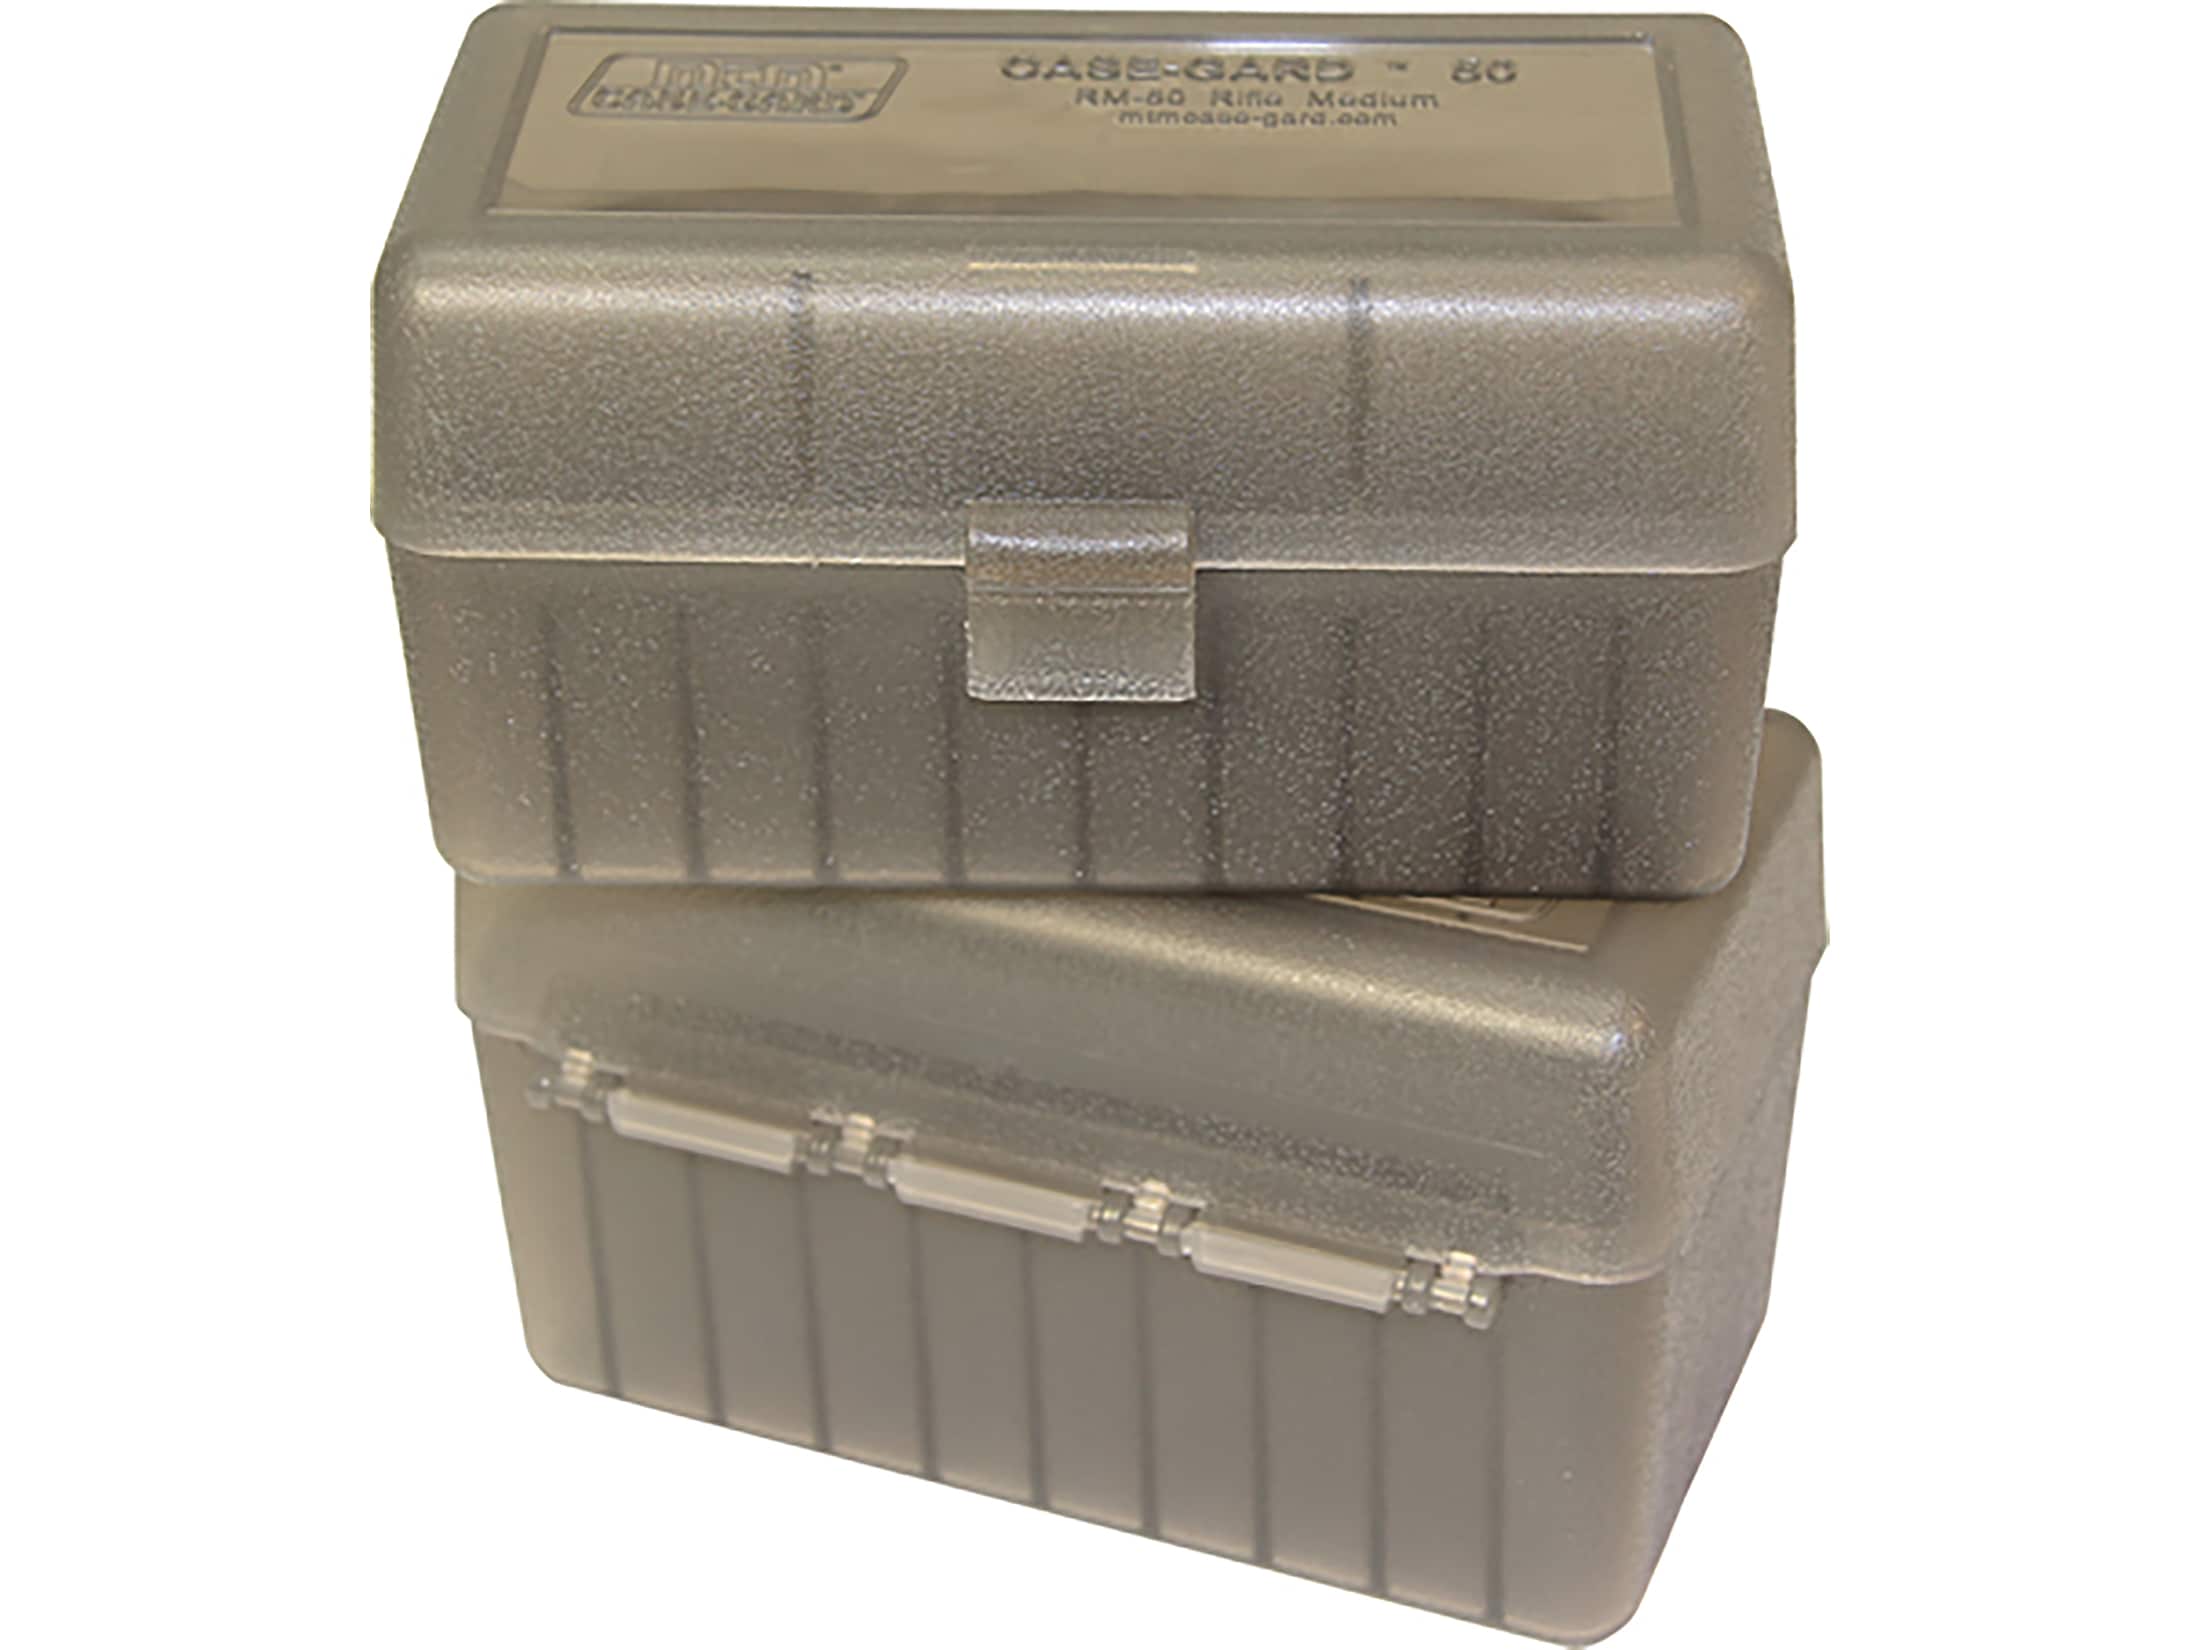 rifle 243 6 pack of 50 round plastic ammo boxes 22-250 30-30 MR-50 Med 308 